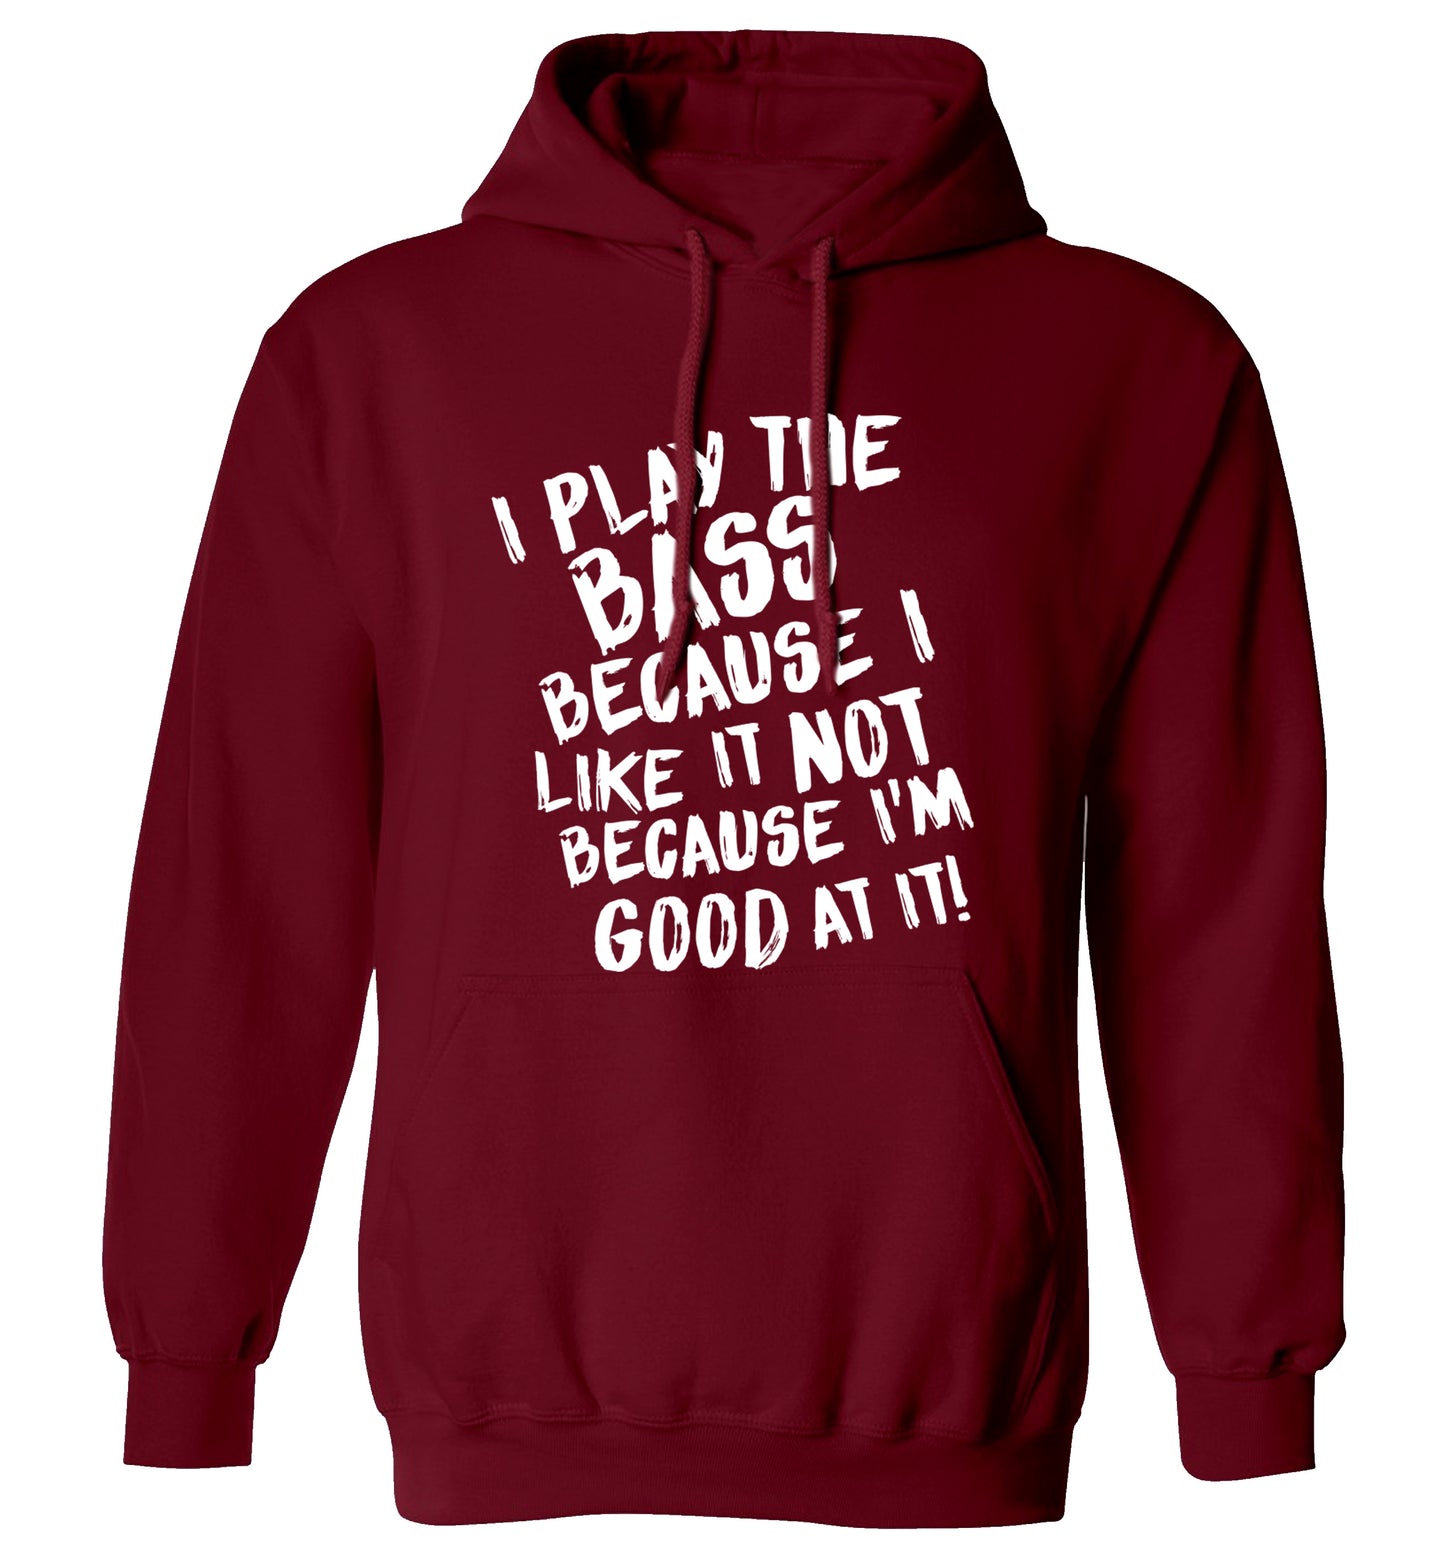 I play the bass because I like it not because I'm good at it adults unisex maroon hoodie 2XL